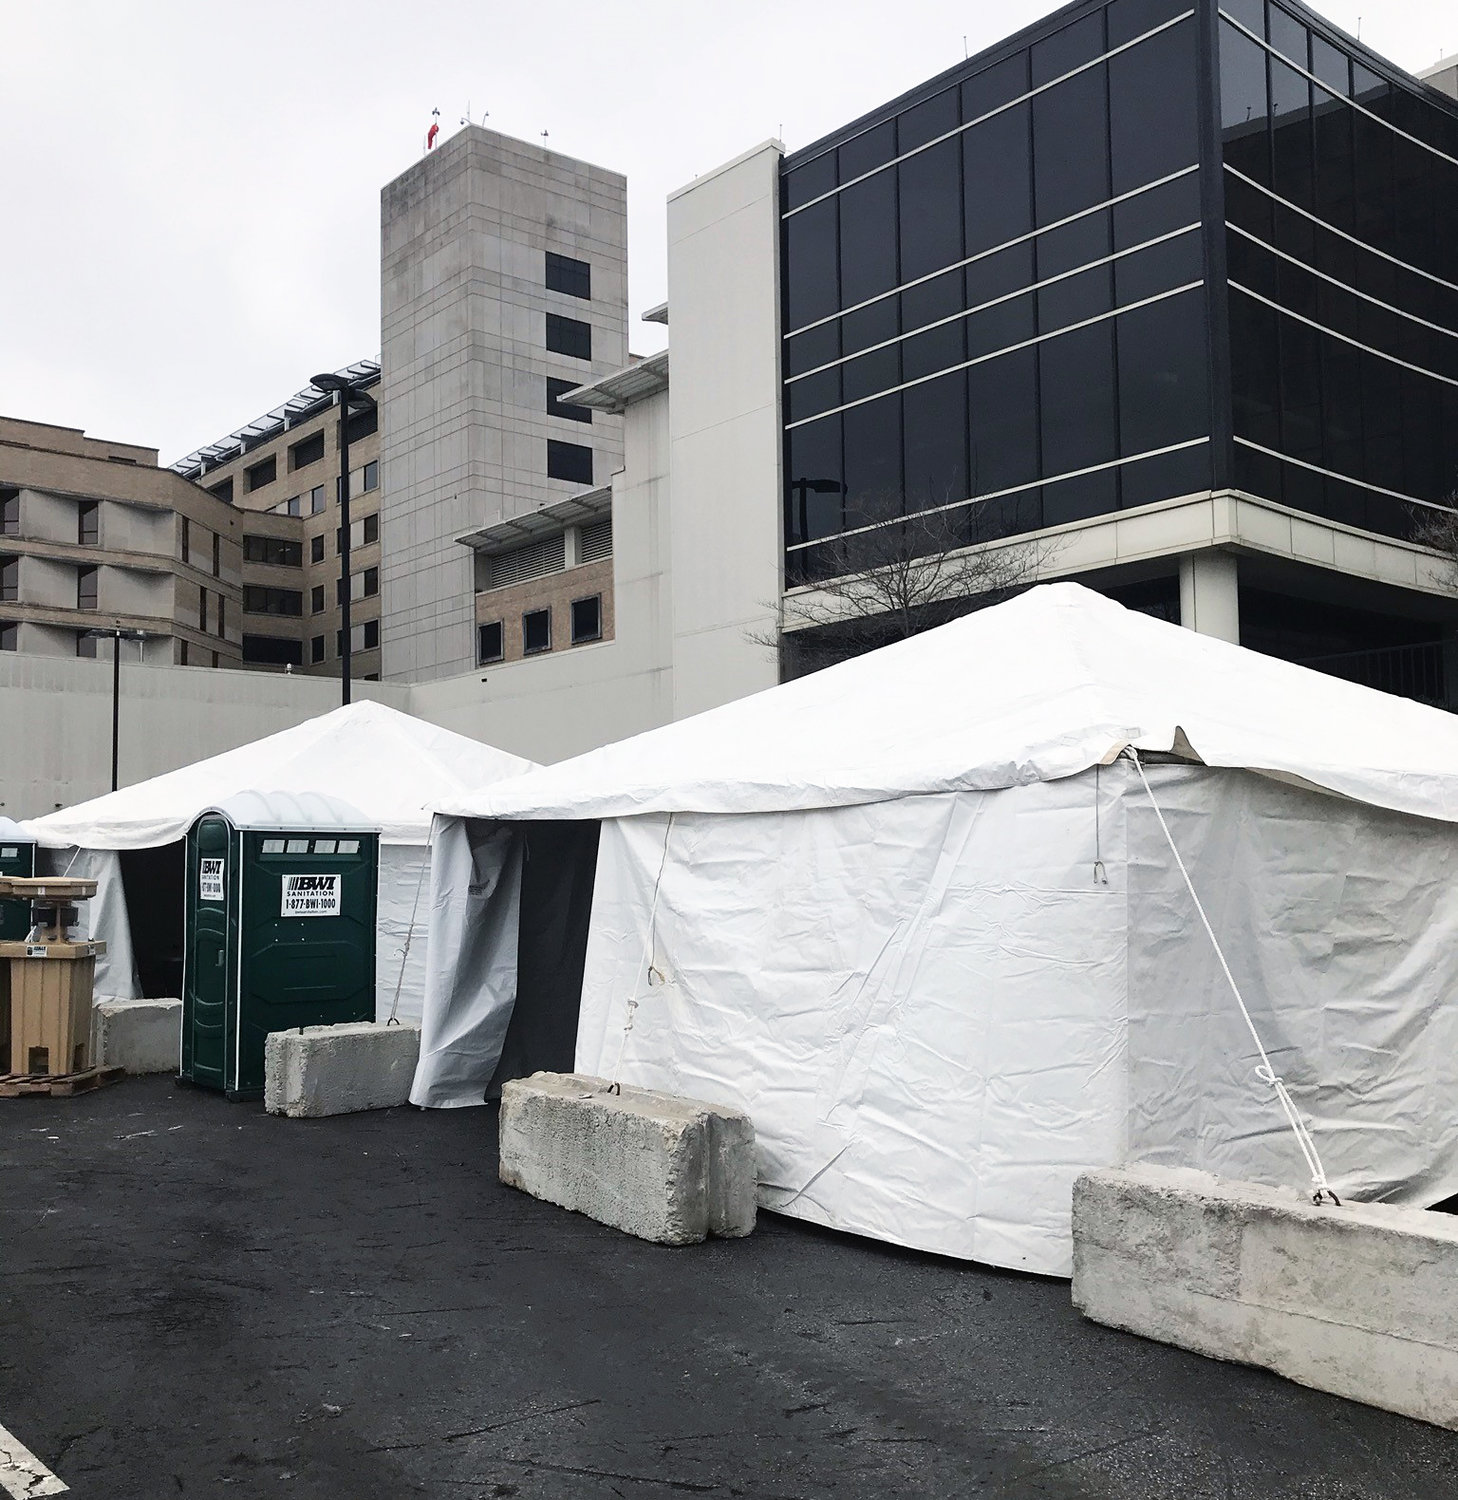 Mercy earlier this week set up a triage facility as a first contact site for patients that potentially have COVID-19.